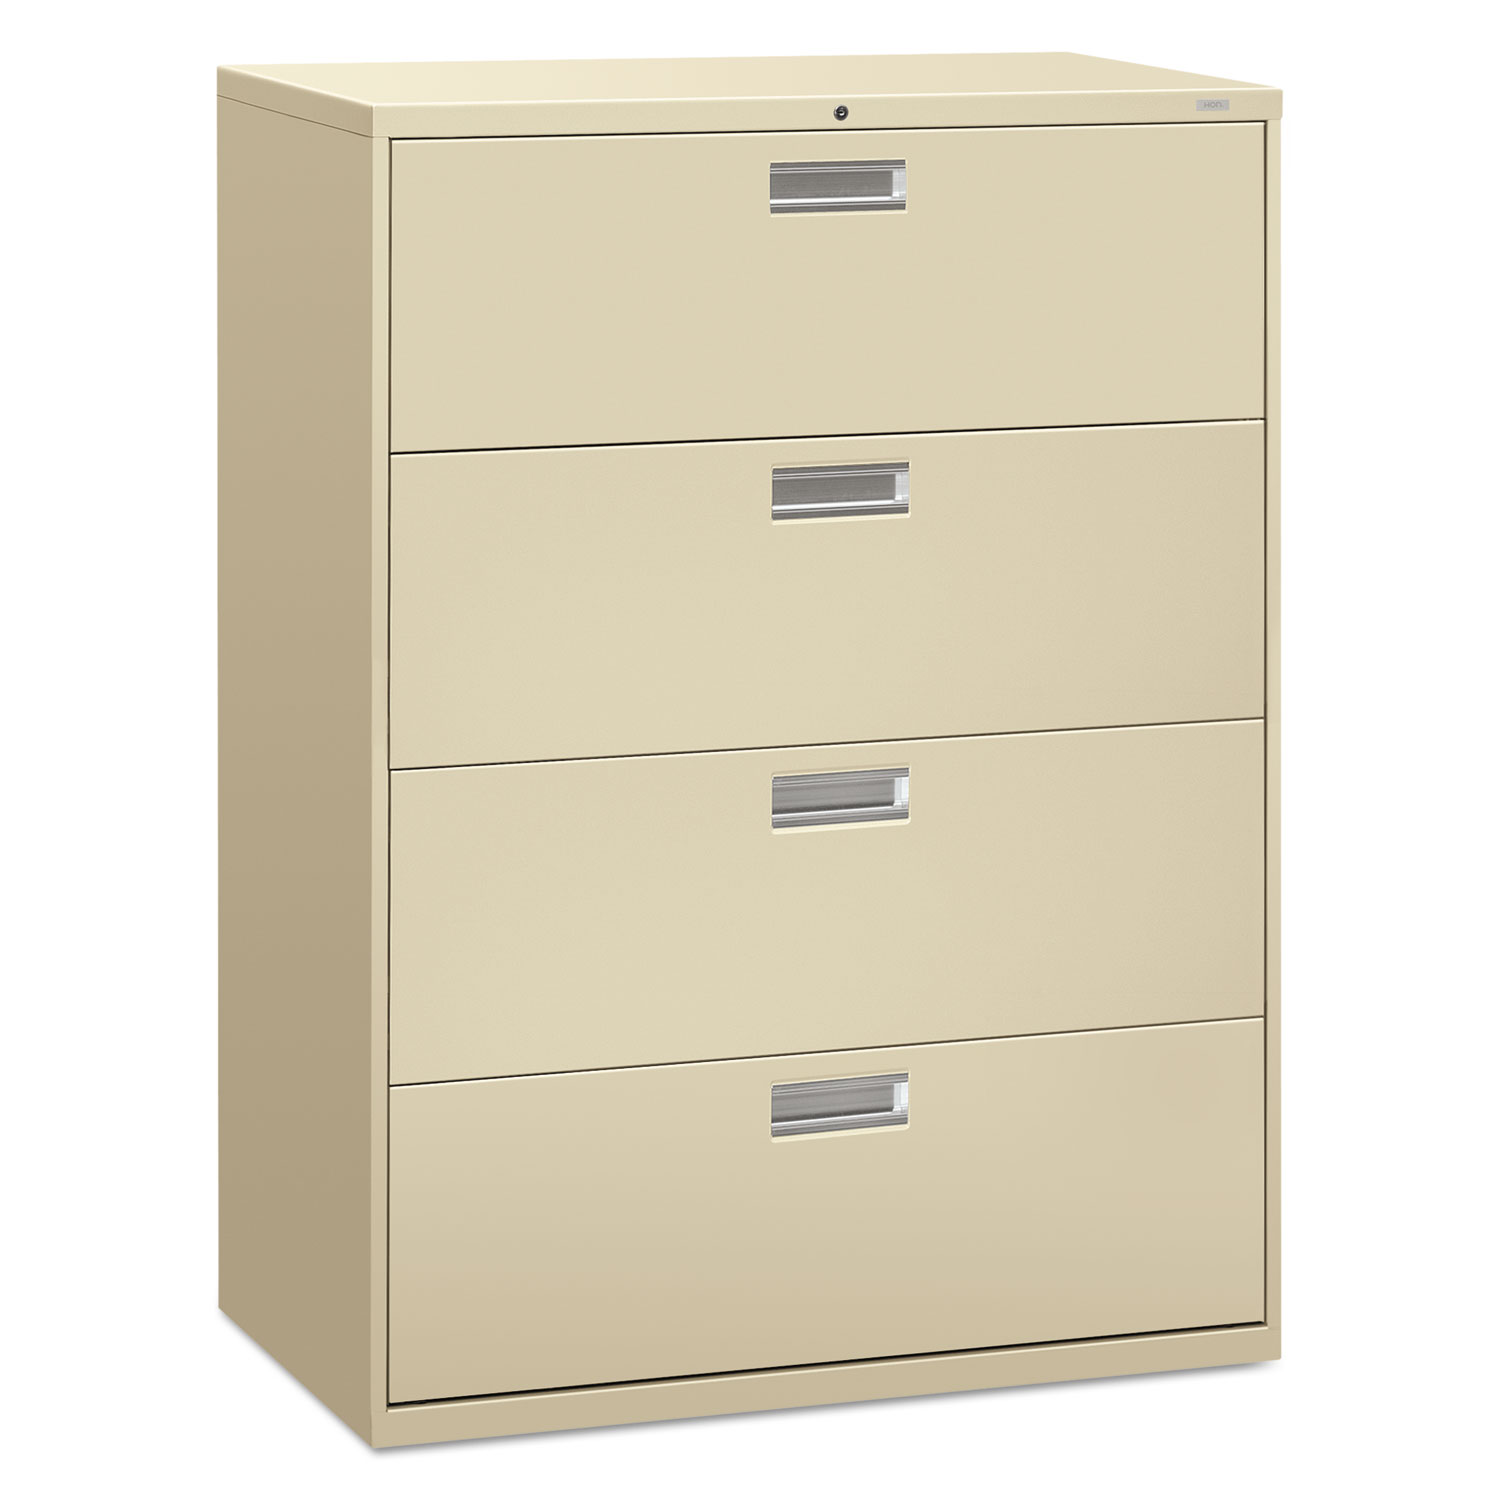 600 Series Four-Drawer Lateral File, 42w x 18d x 52 1/2h, Putty